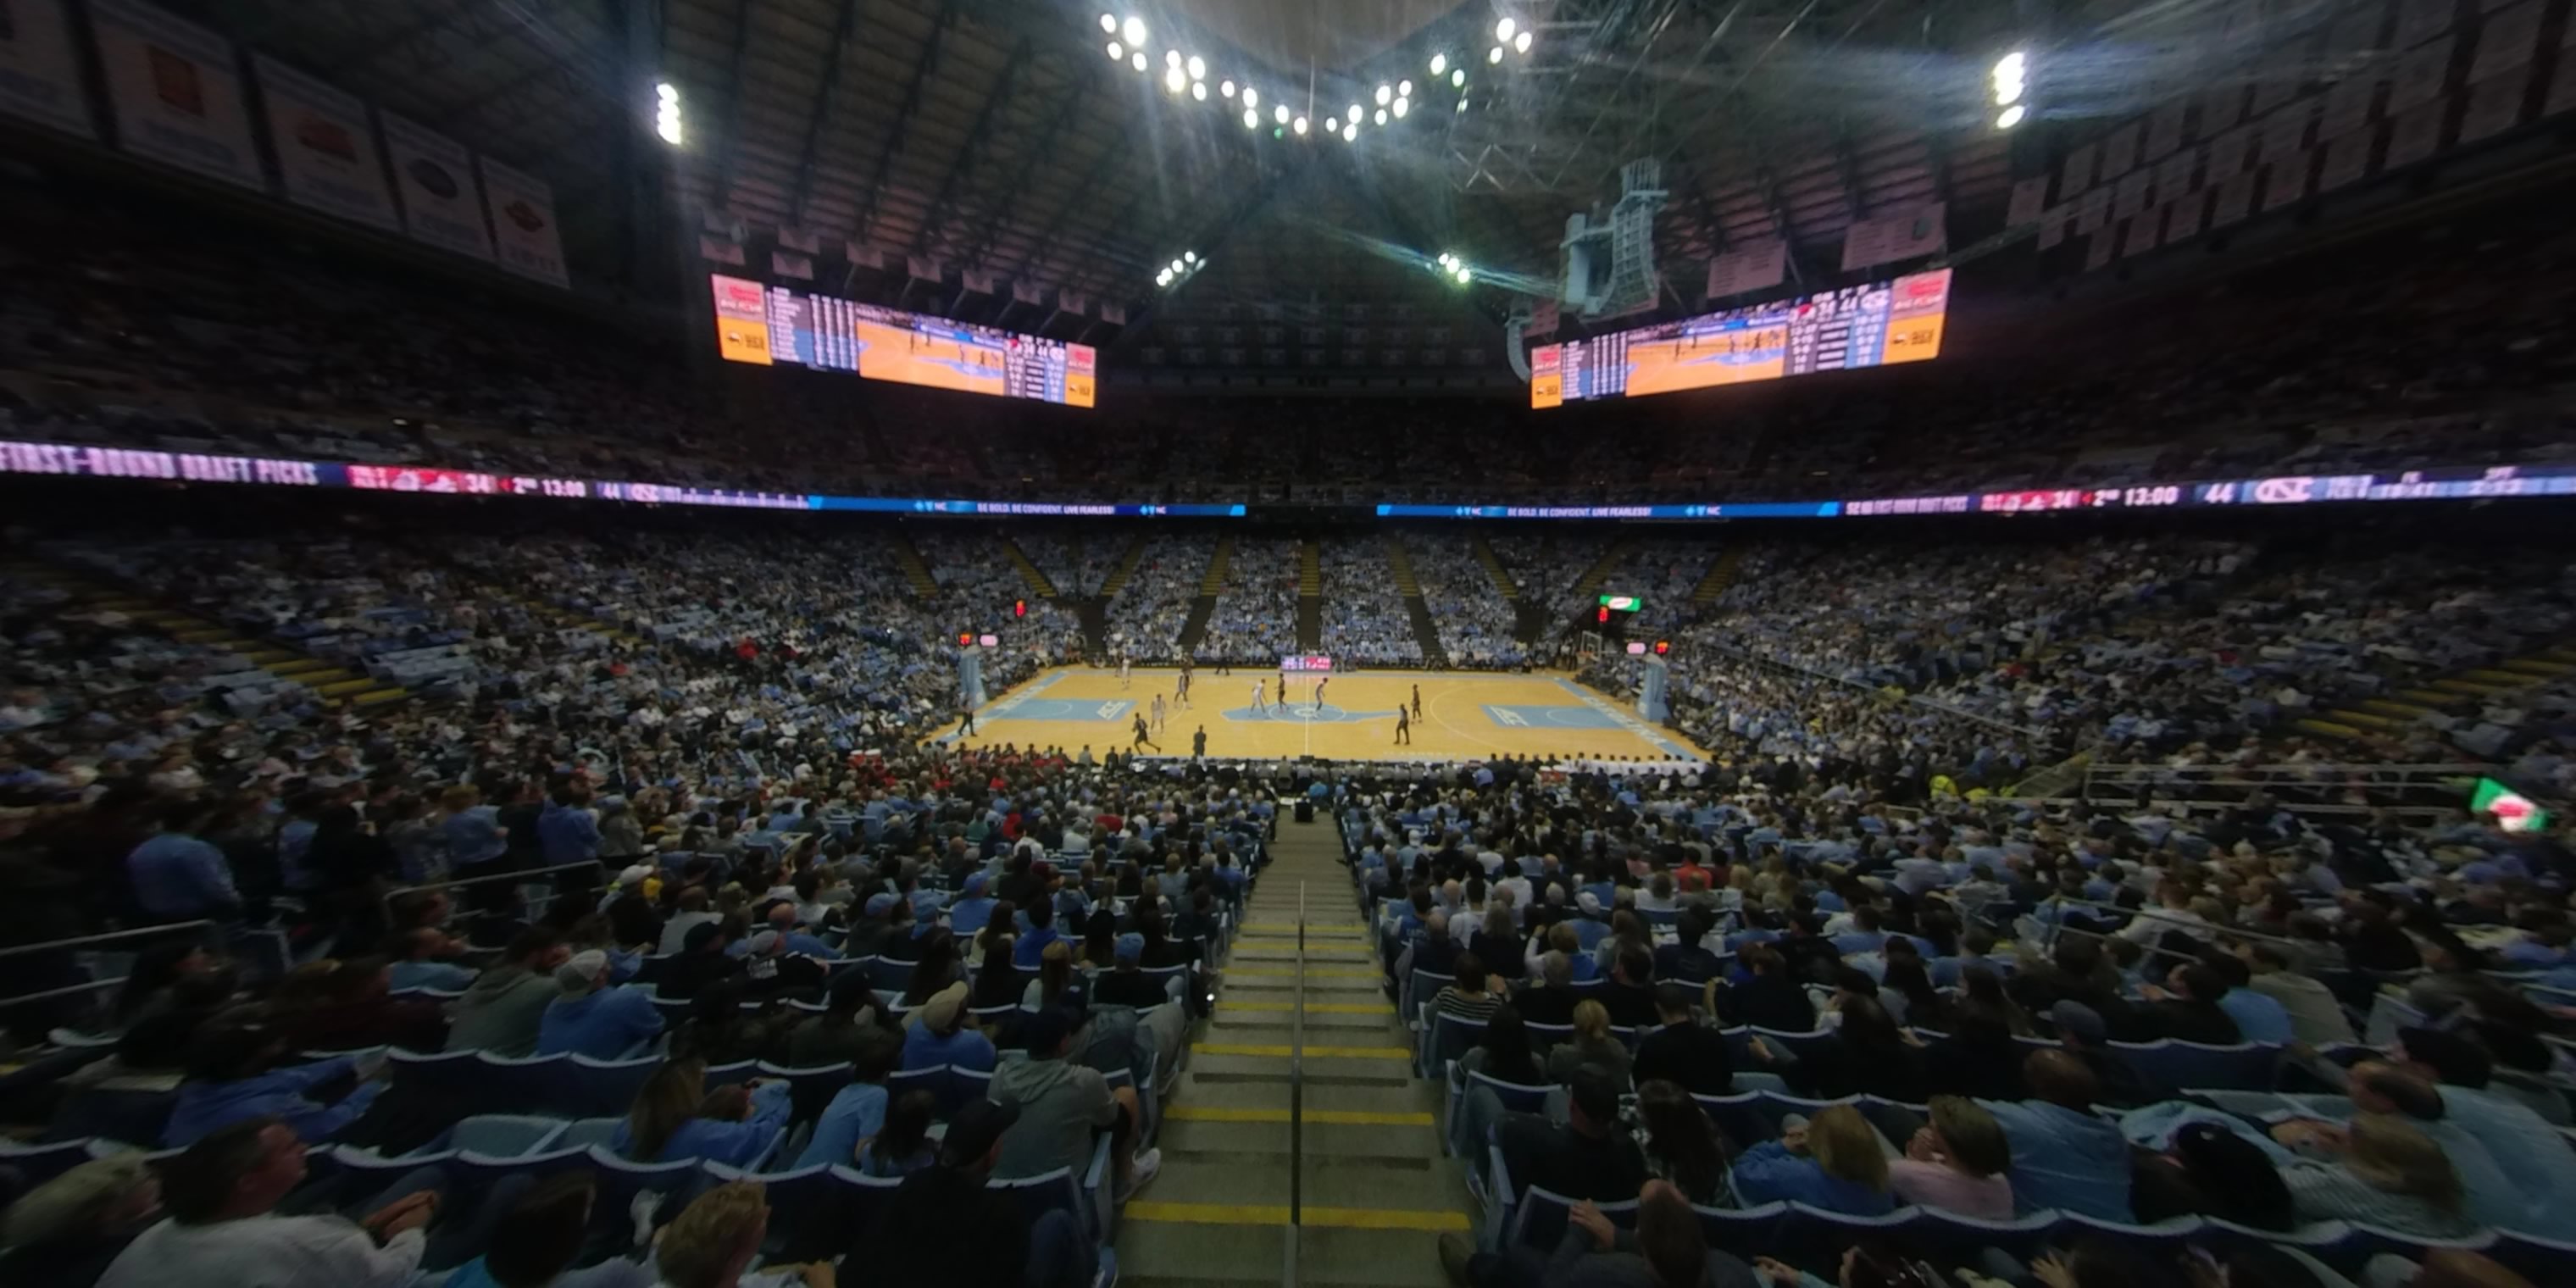 section 108 panoramic seat view  - dean smith center